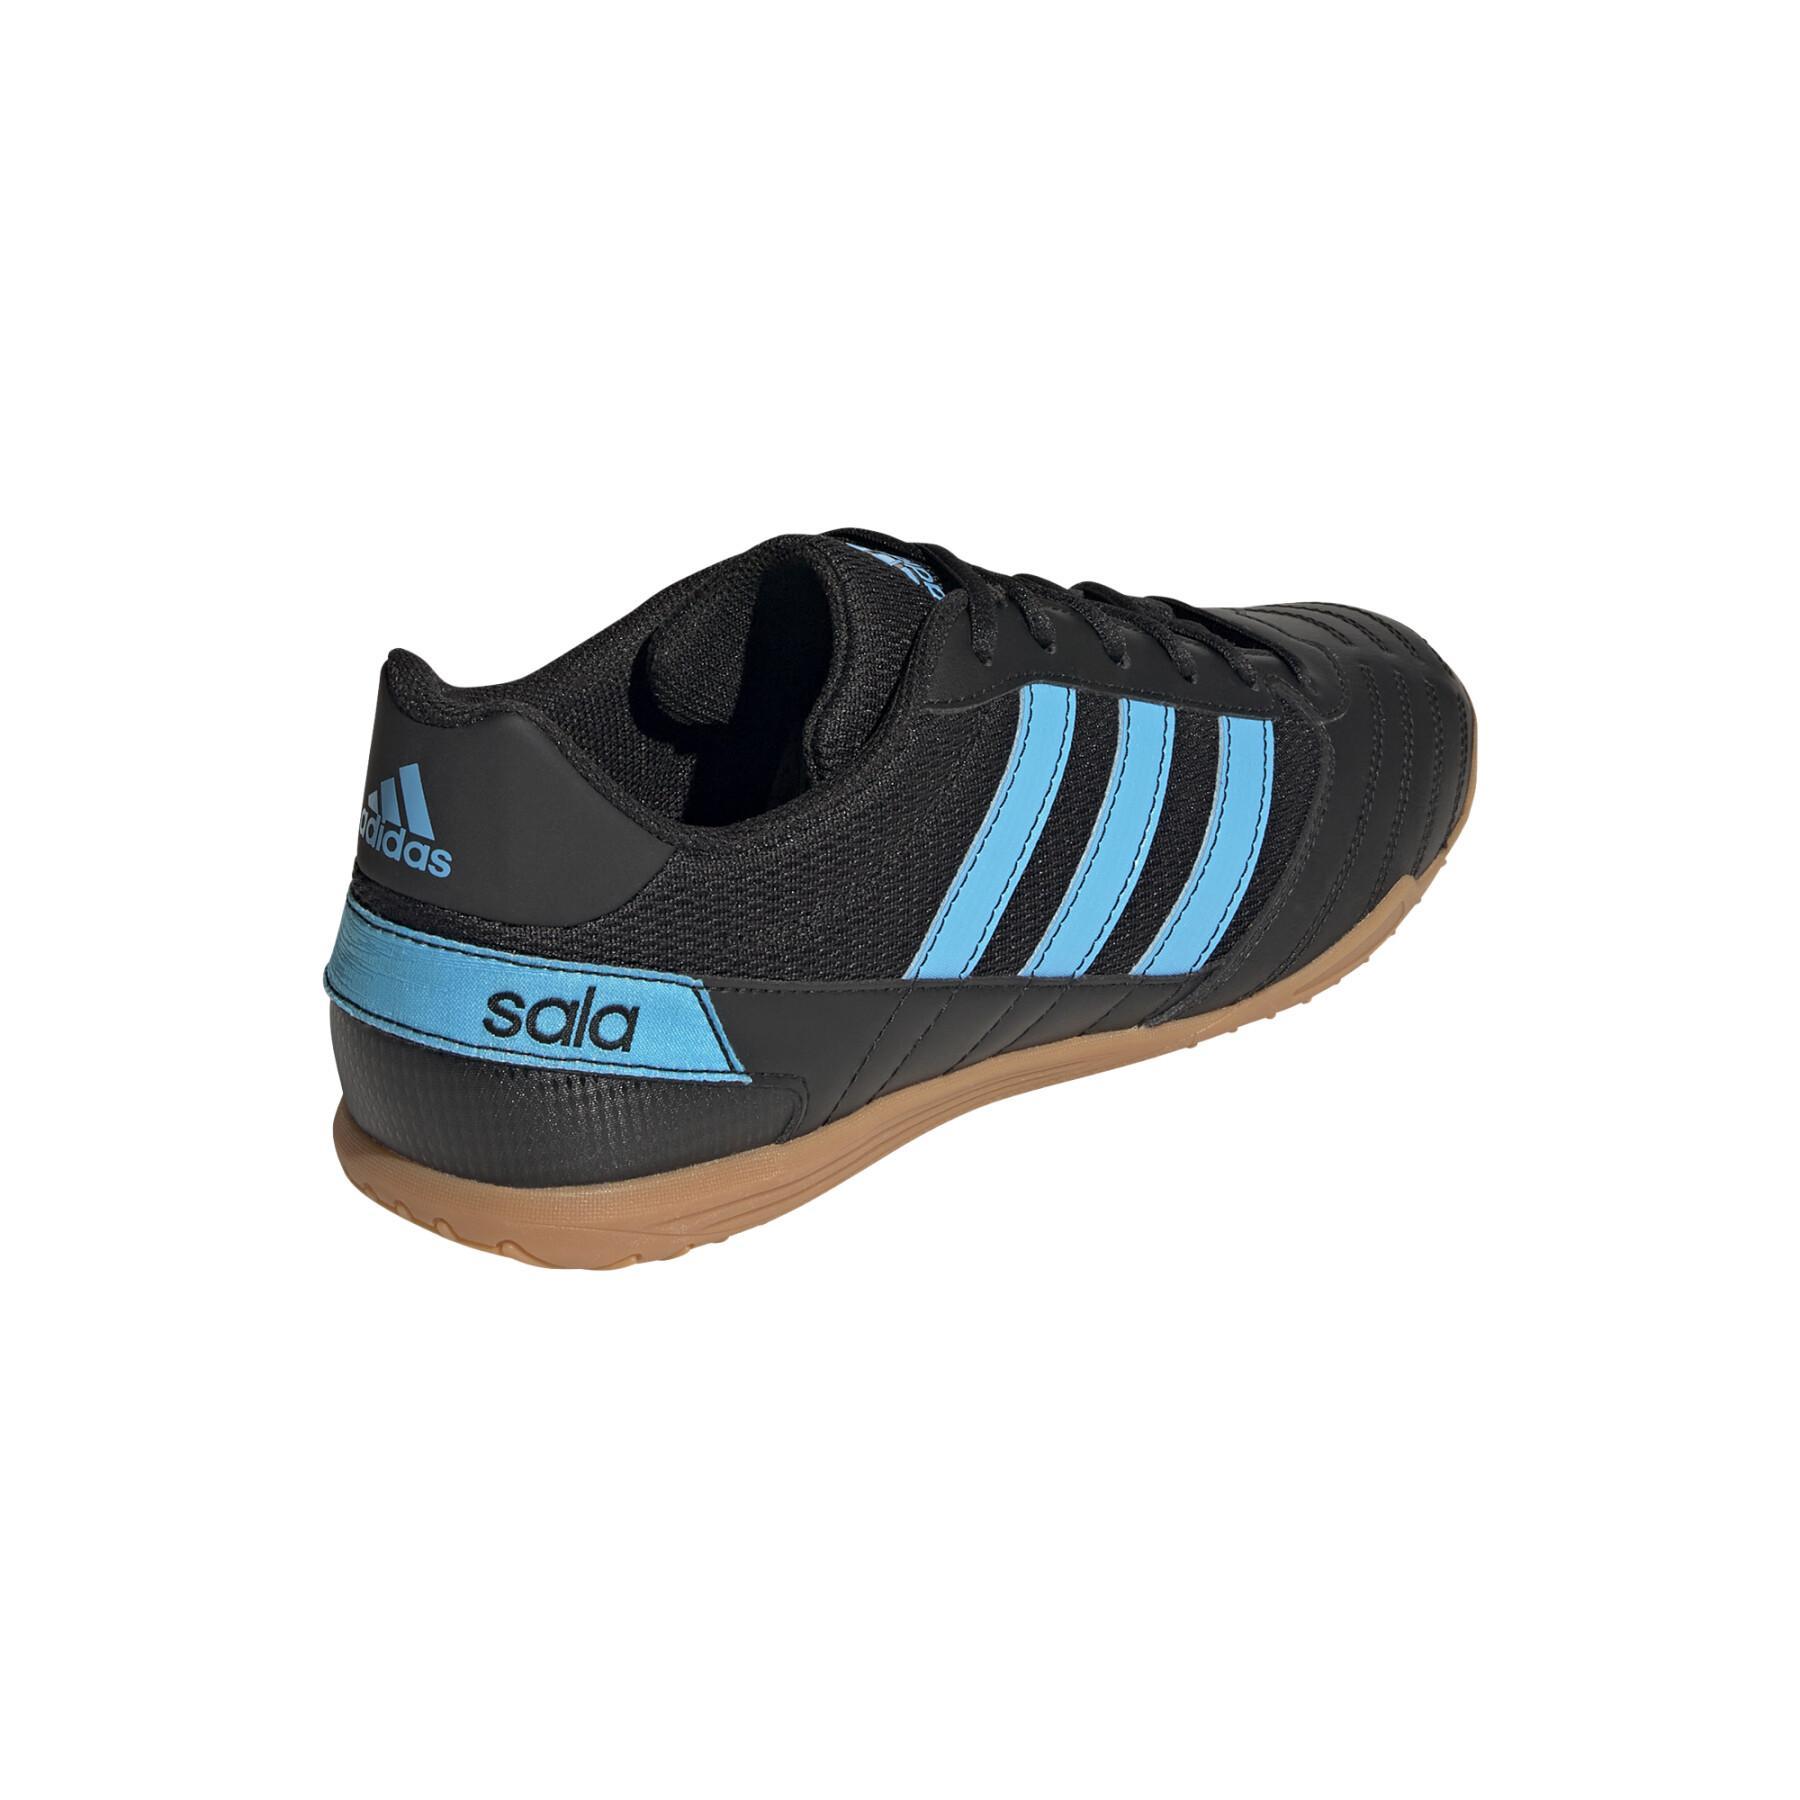 Soccer shoes adidas Super IN Sala